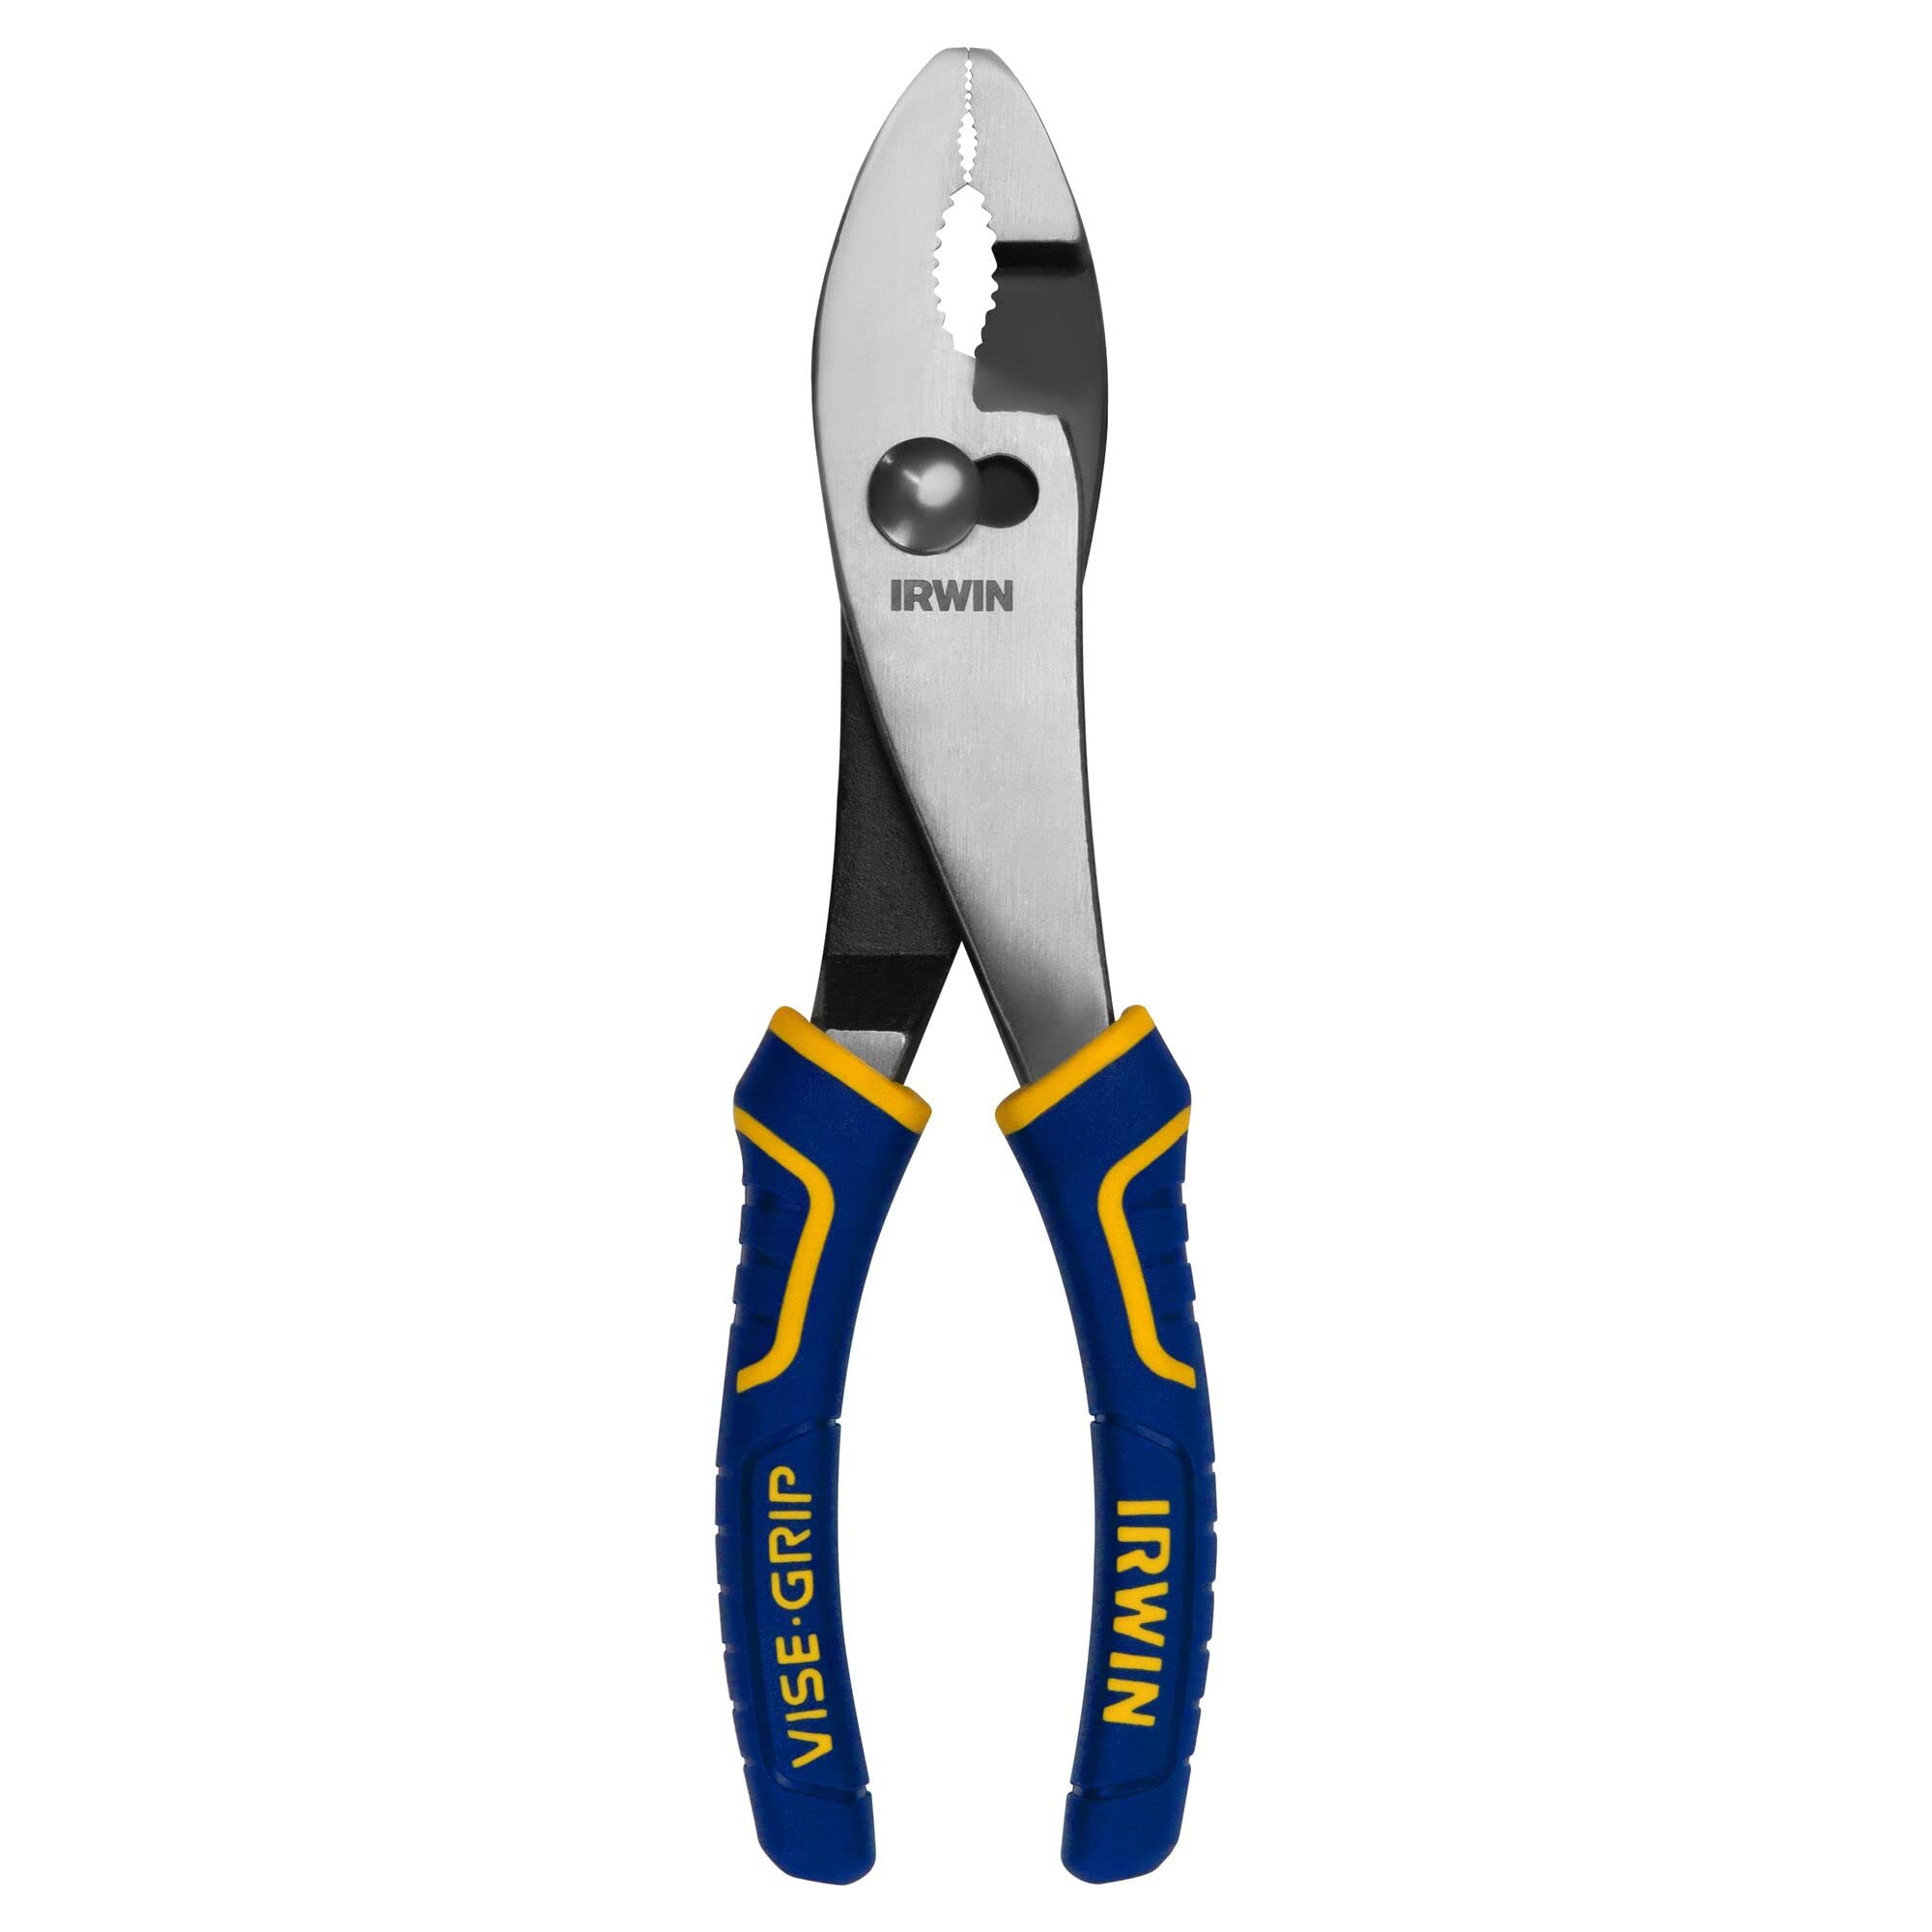 8" Irwin Vise-Grip Slip Joint Pliers $7 + Free Shipping w/ Prime or on Orders $35+